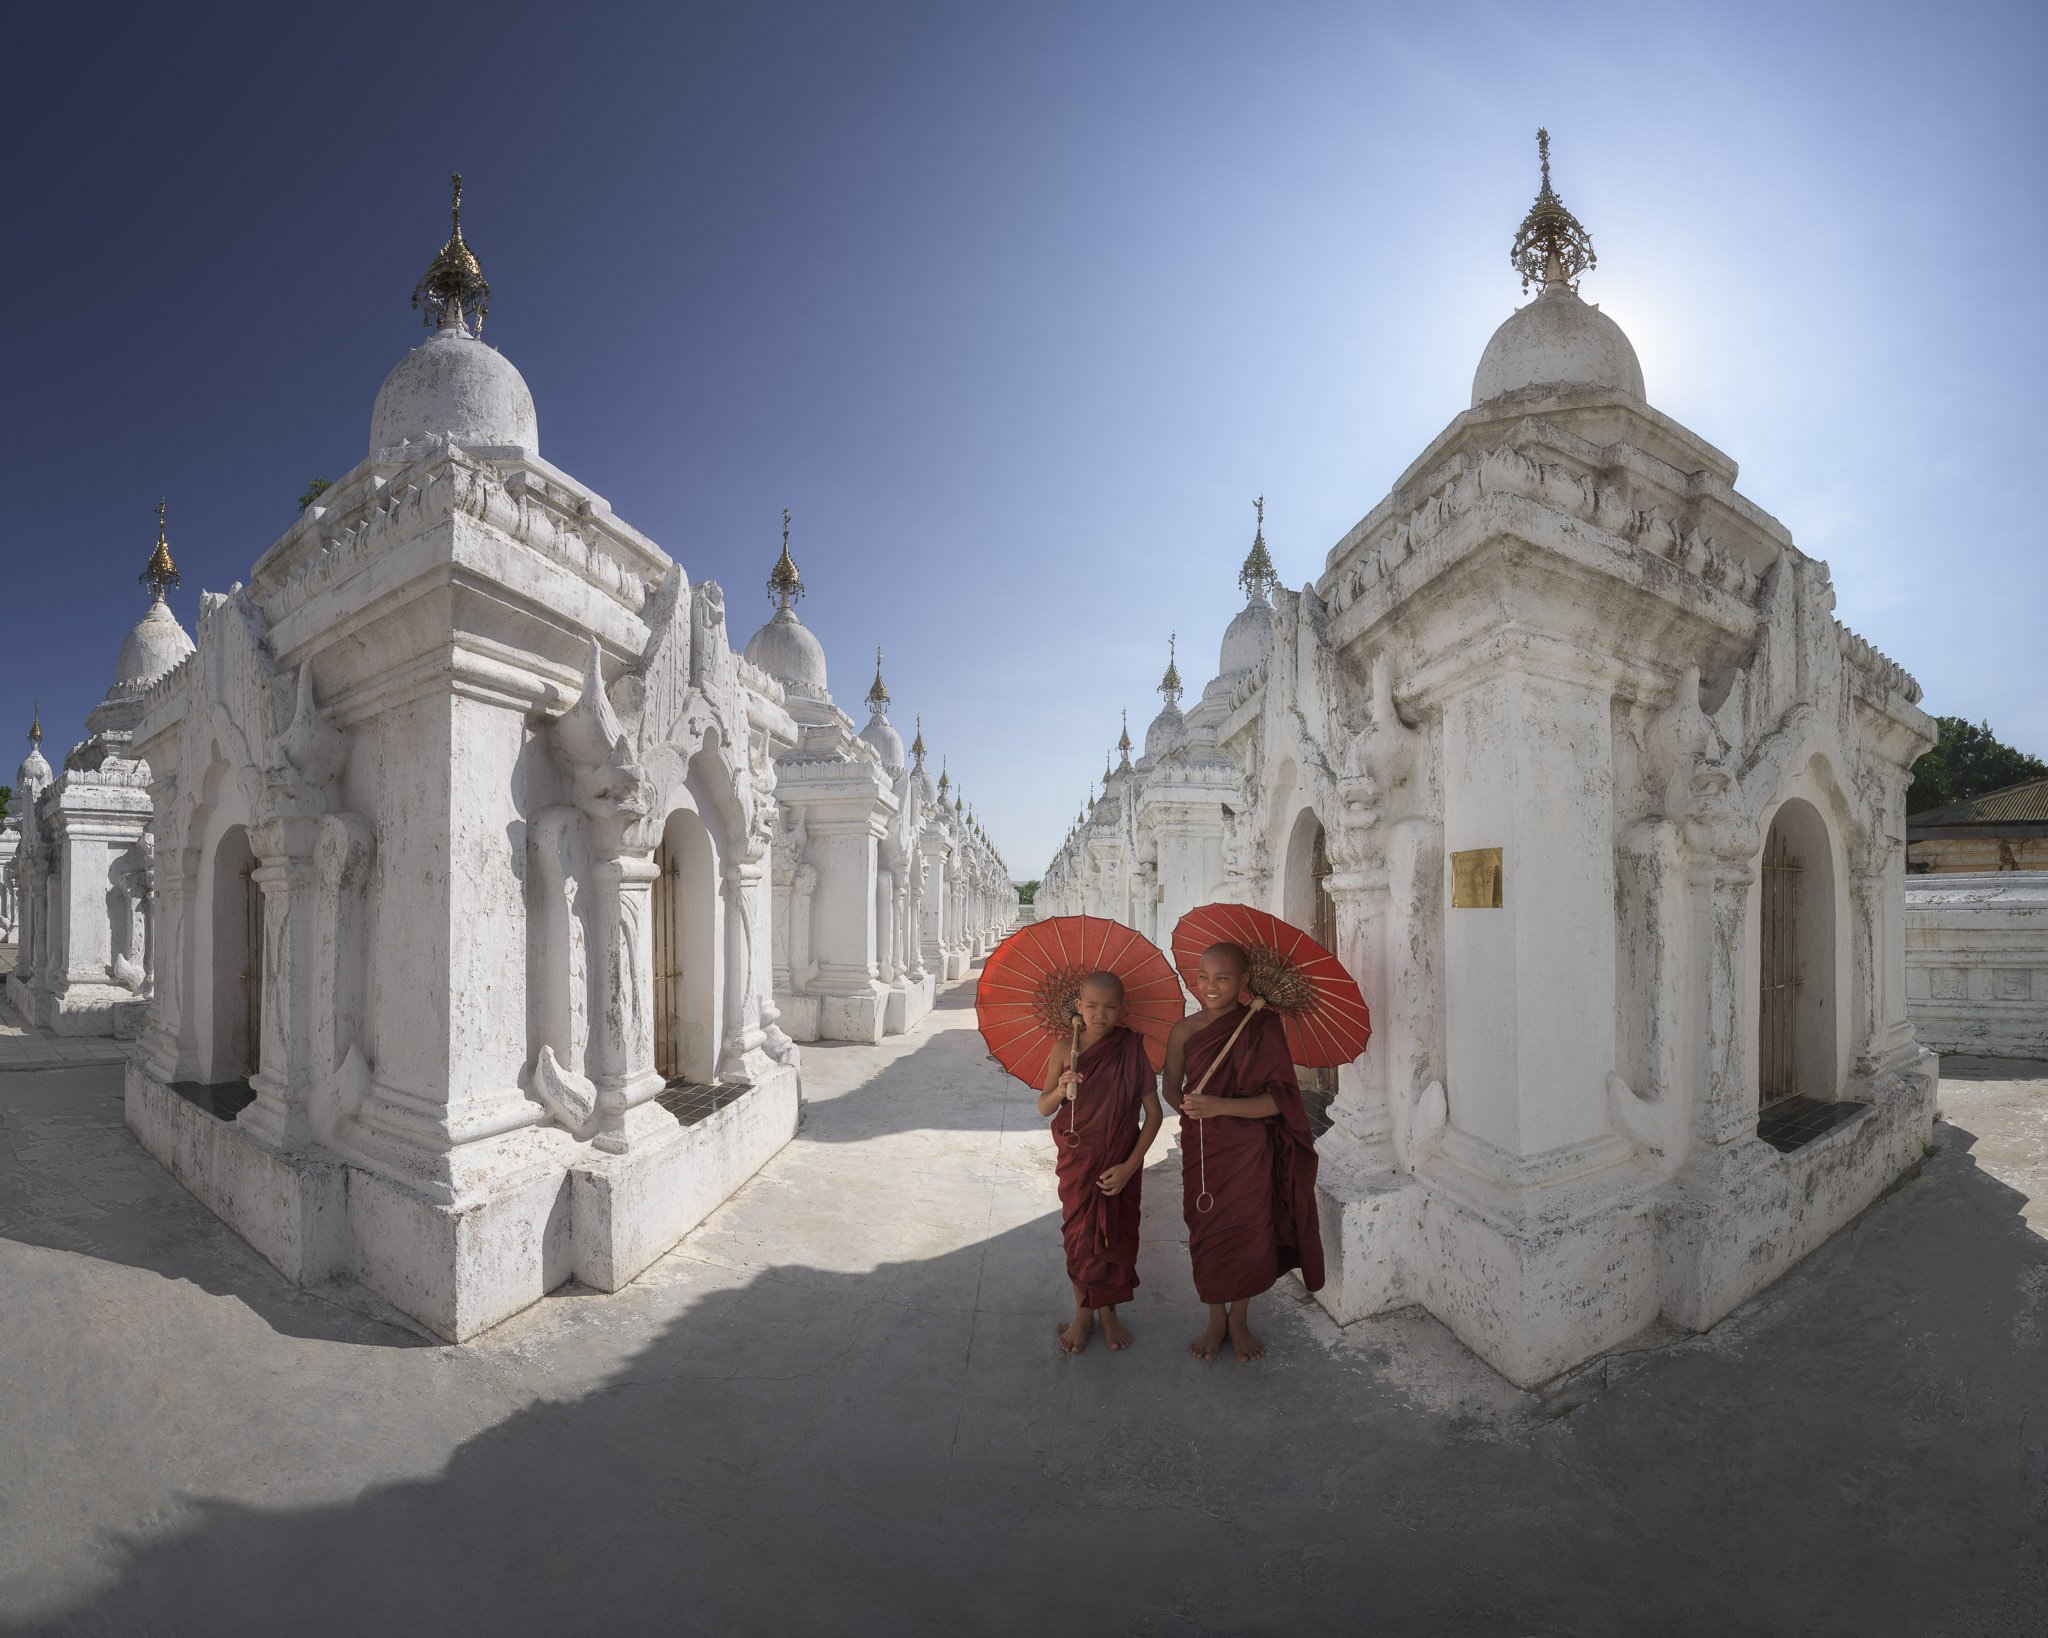 archaeological, architecture, asia, asian, attraction, blue, book, buddha, buddhism, buddhist, building, burma, burmese, complex, culture, dome, exterior, famous, heritage, historic, history, kuthodaw, landmark, largest, majestic, mandalay, monks, monumen, Andrey Omelyanchuk